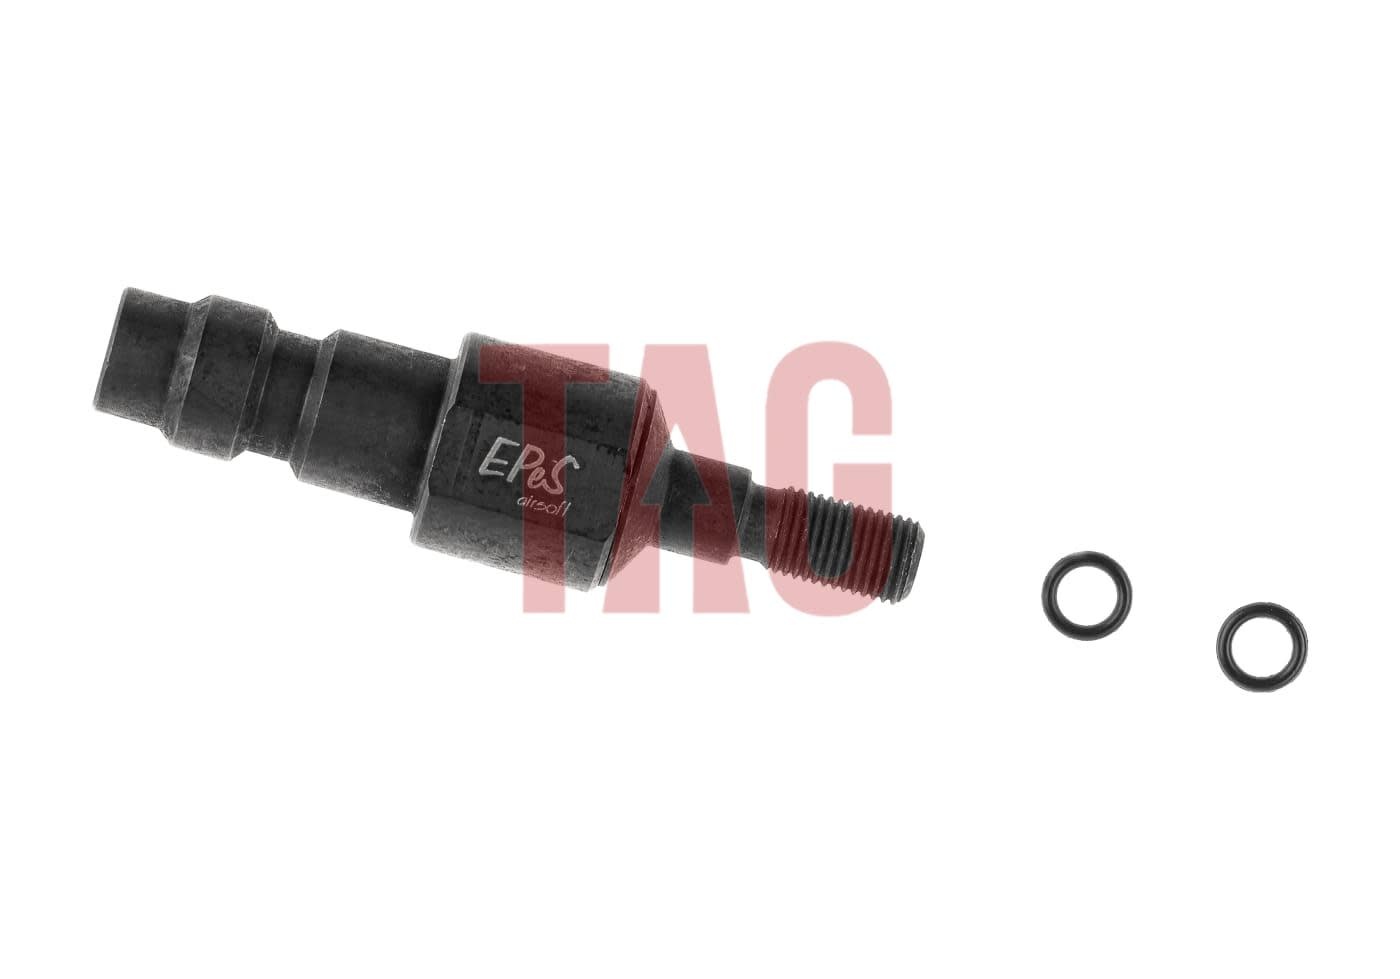 EPeS EPeS HPA Self Closing Adaptor for GBB TM/TW Thread